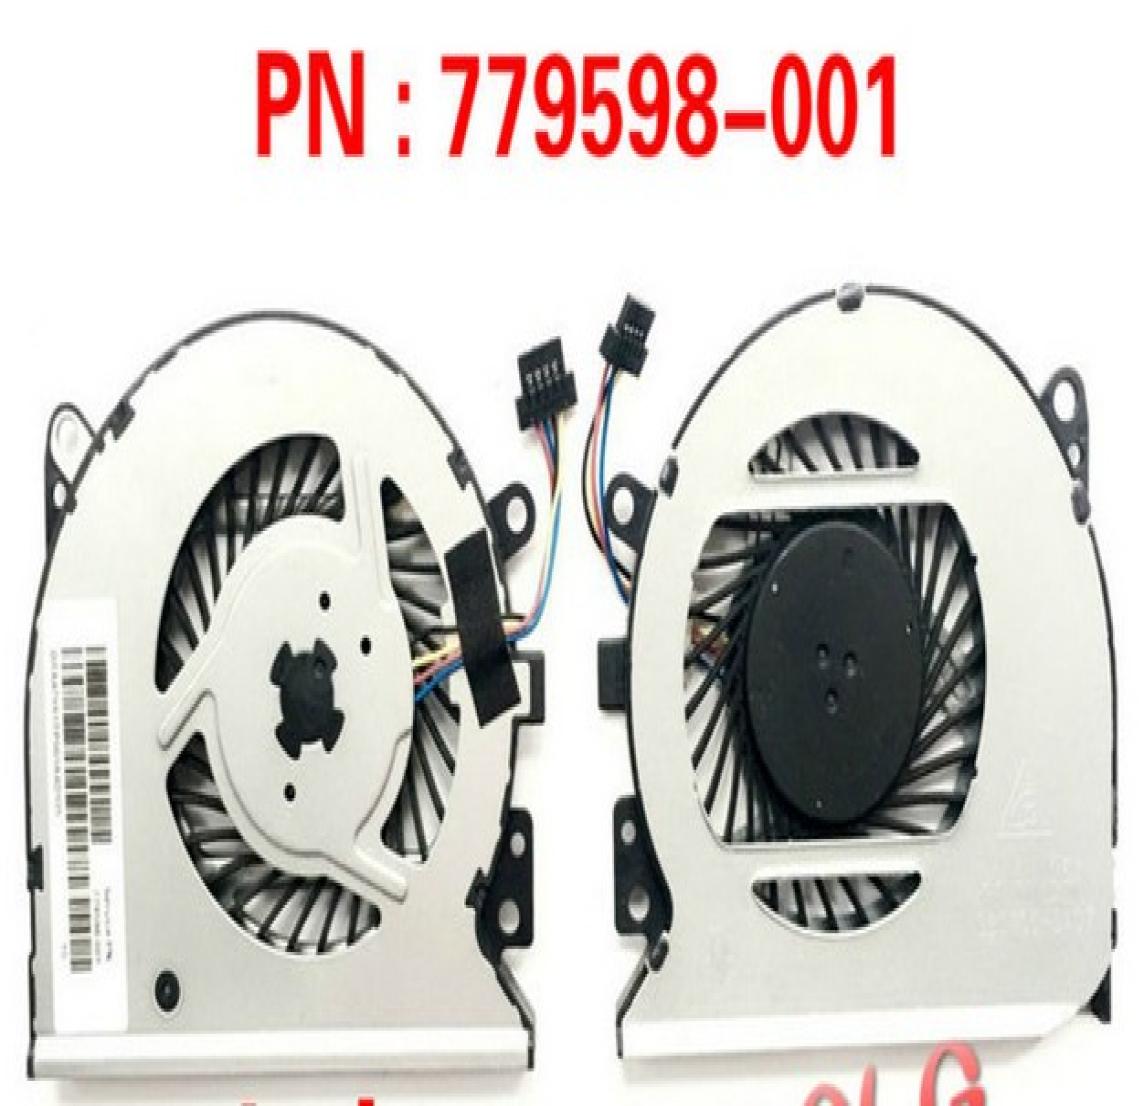 

New laptop CPU cooling fan for HP Pavilion X360 13a000 13A010Dx 13A 774653001 779598001 13a100no7578889